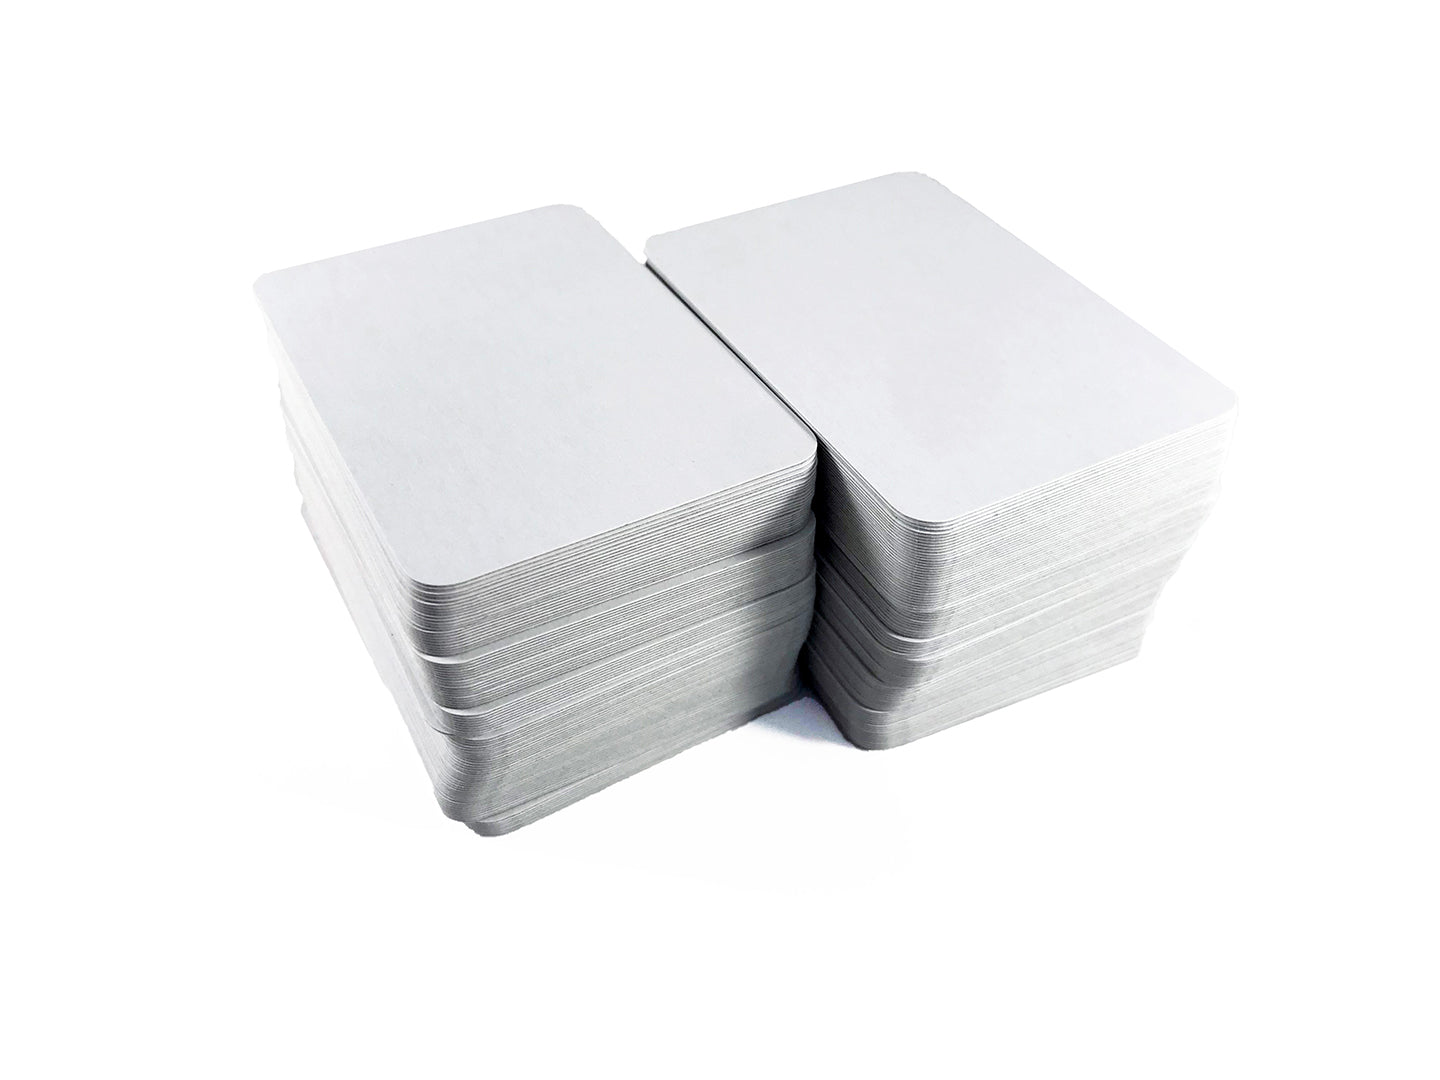 200 Miniature Blank Playing Cards - Half-Size Poker Cards